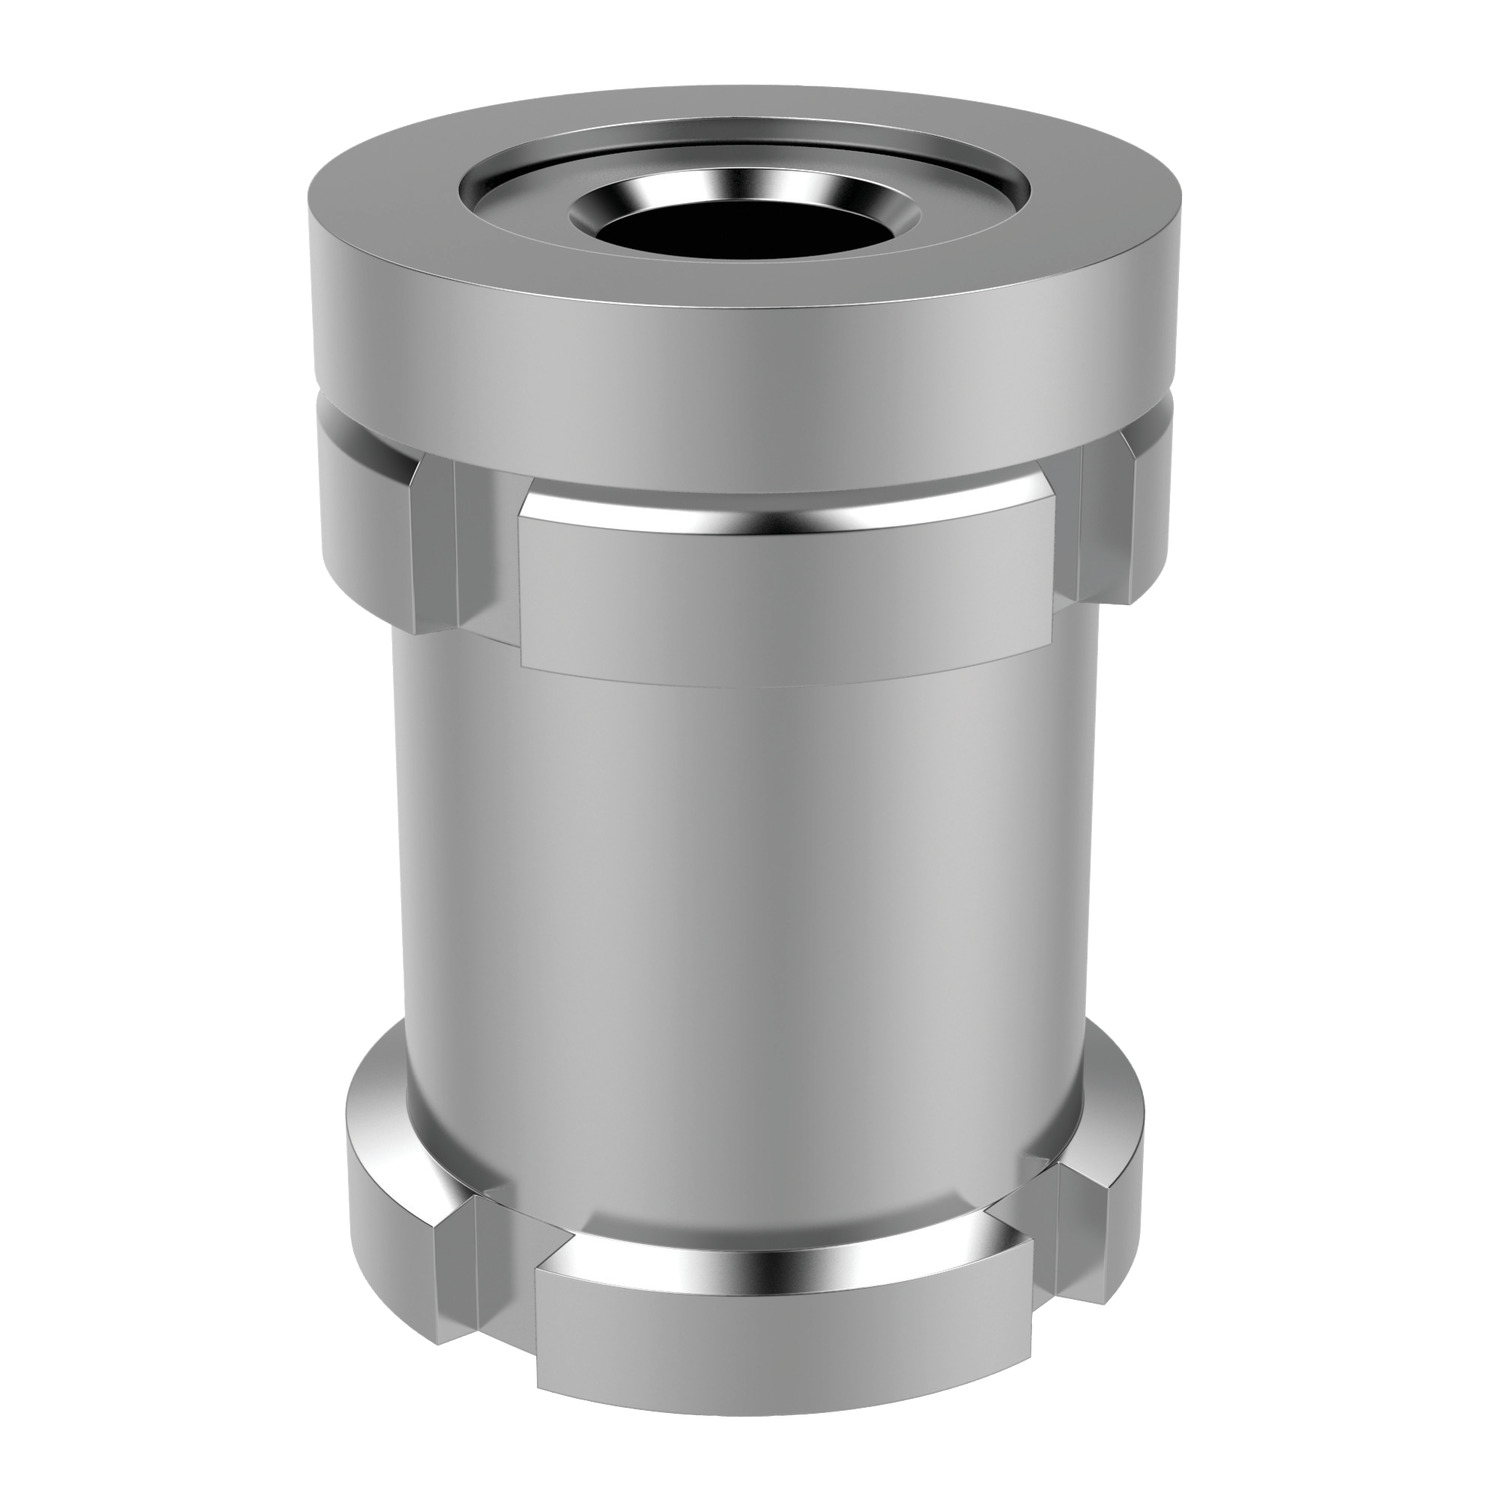 Tilt Head Precision Adjuster After setting the height, the structure can be bolted down using a suitable 8,8 strength bolt. Made from zinc plated steel or stainless (A1, A4 on request).